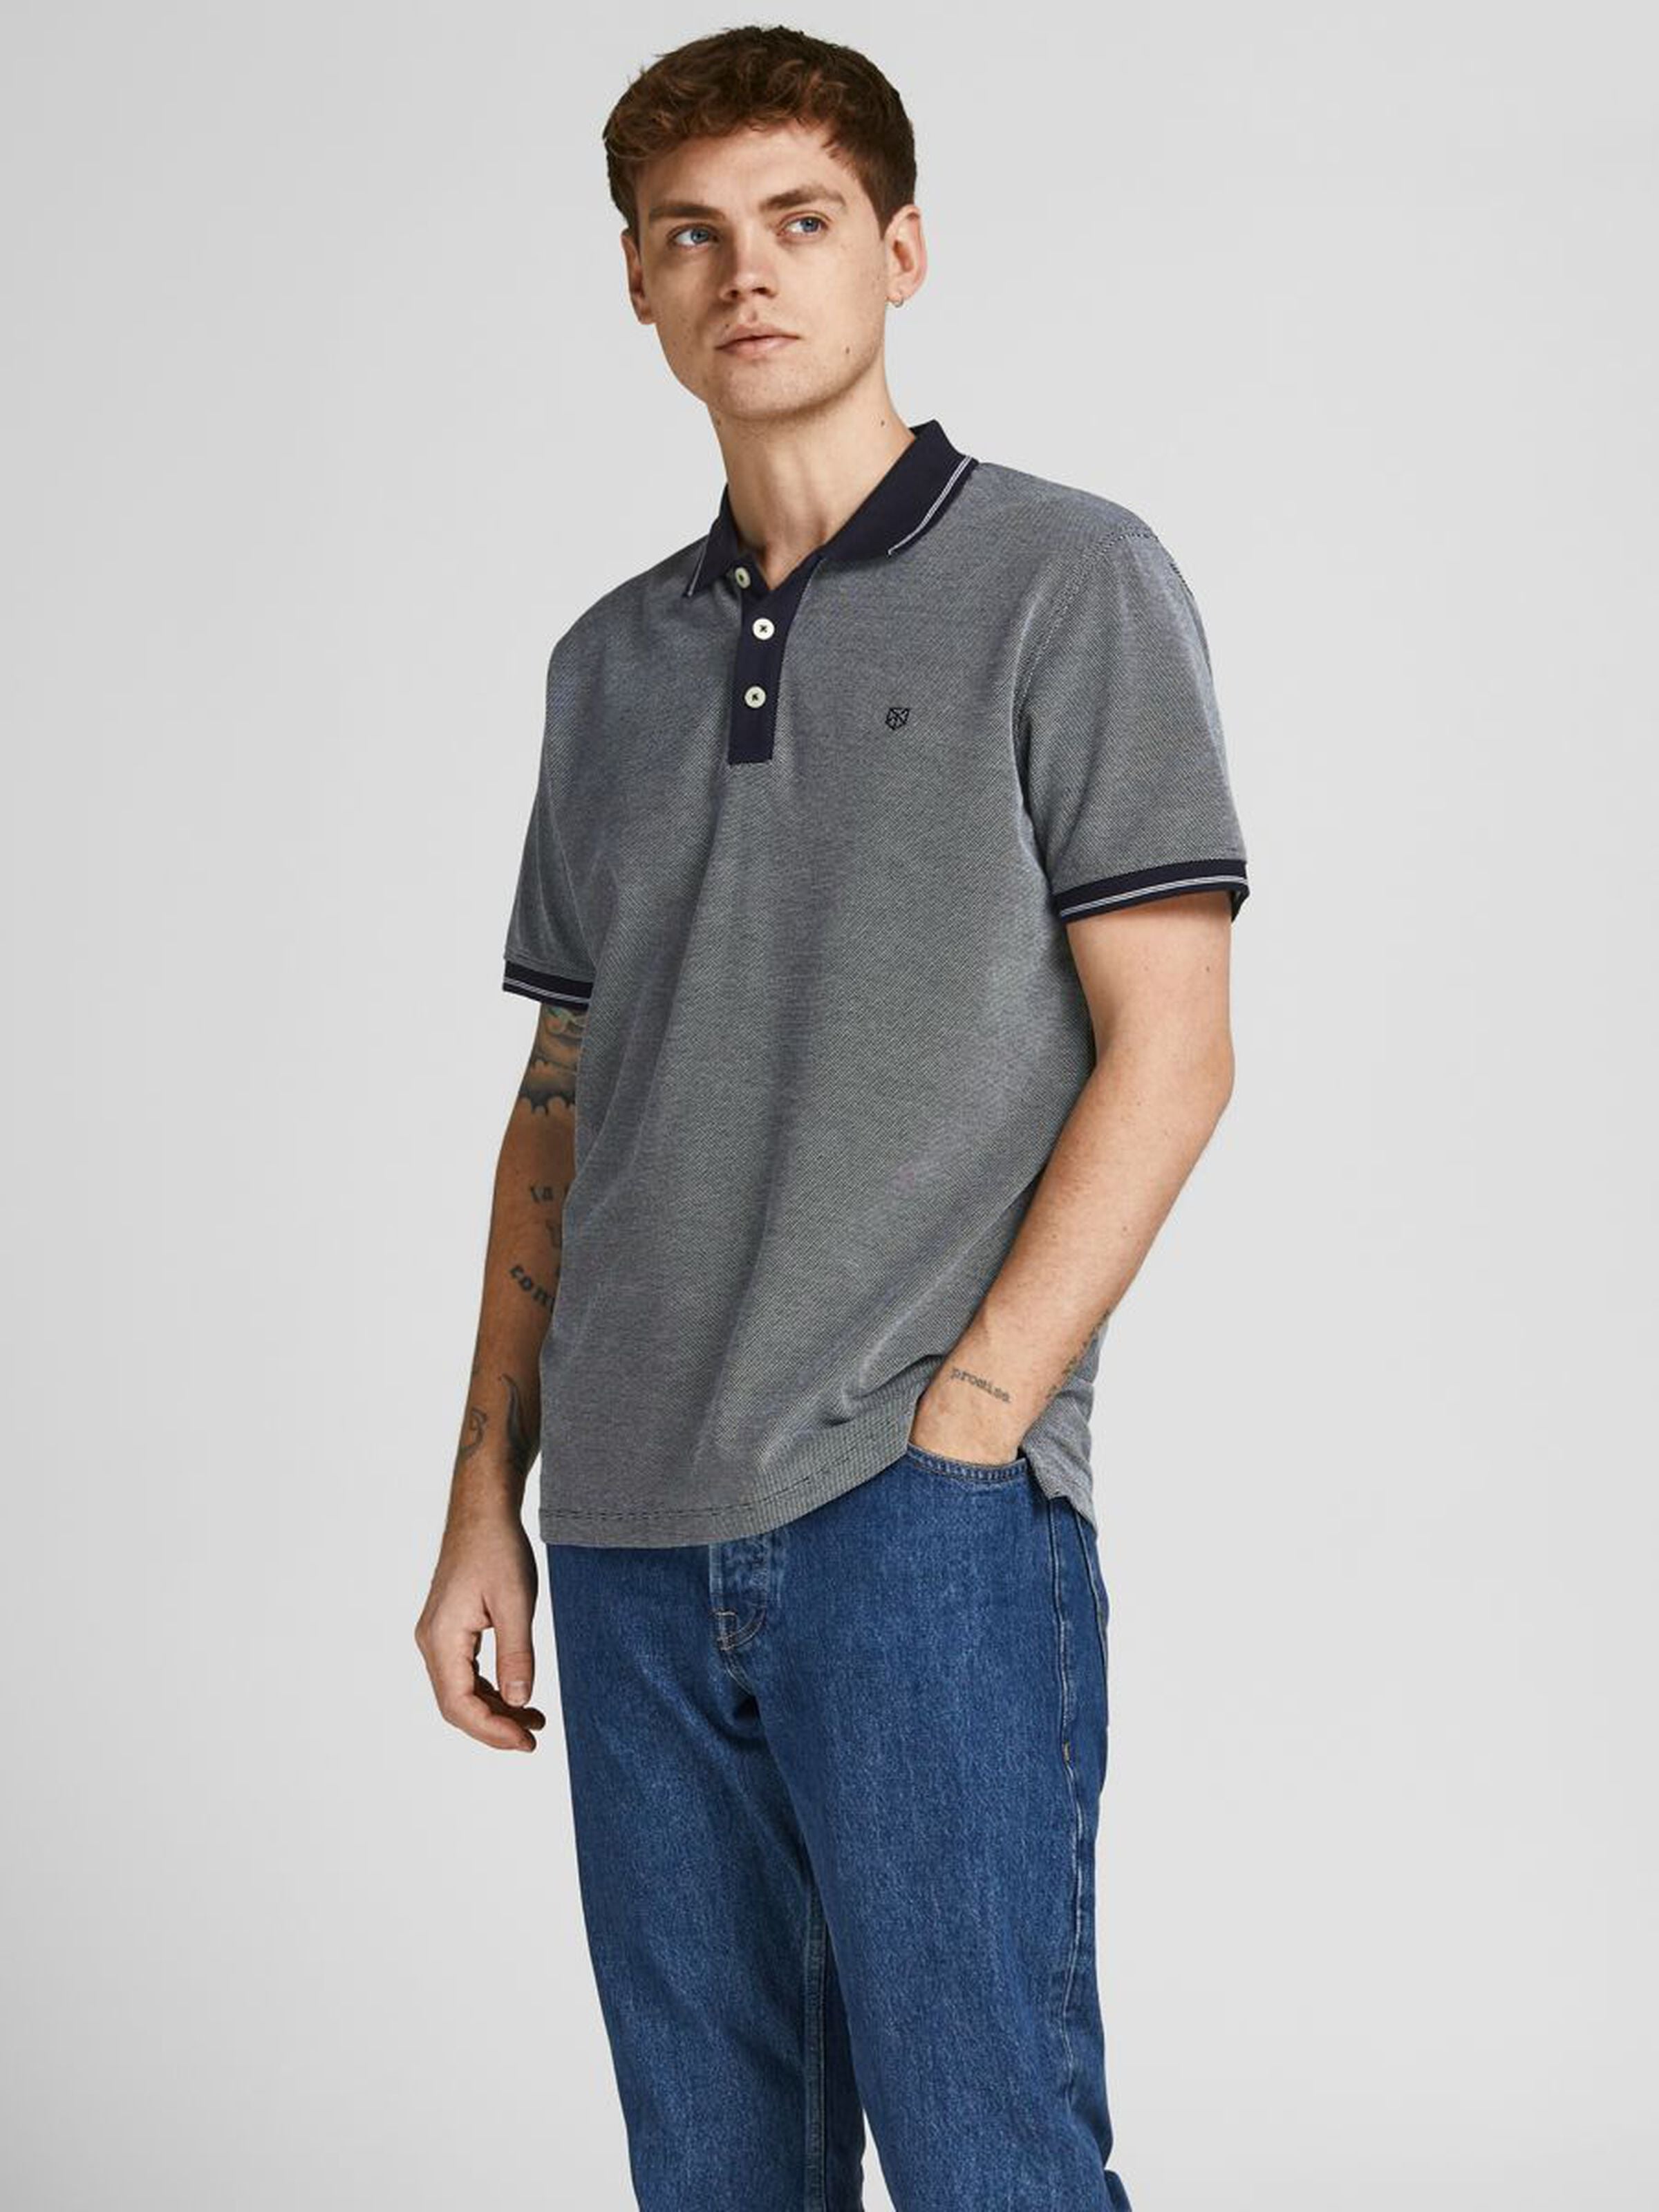 Bluwin Short Sleeve Blue Perfect Navy Polo